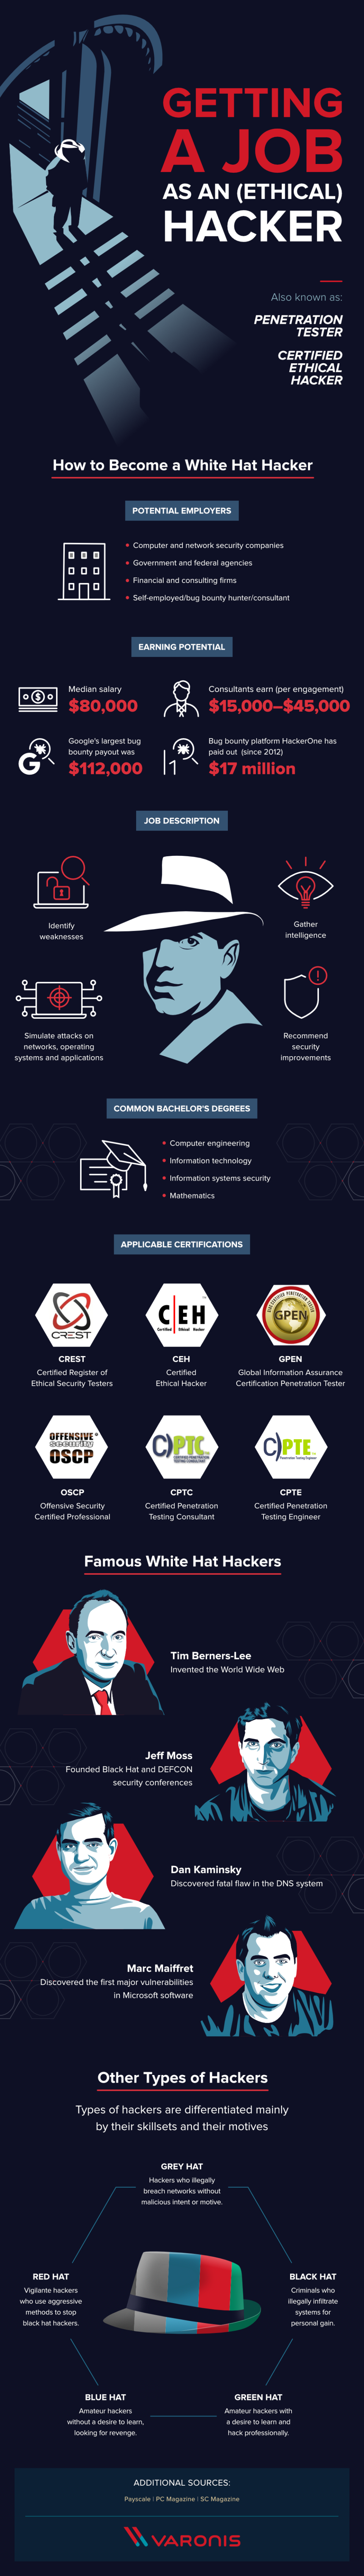 What Does it Take to Be an Ethical Hacker? #infographic